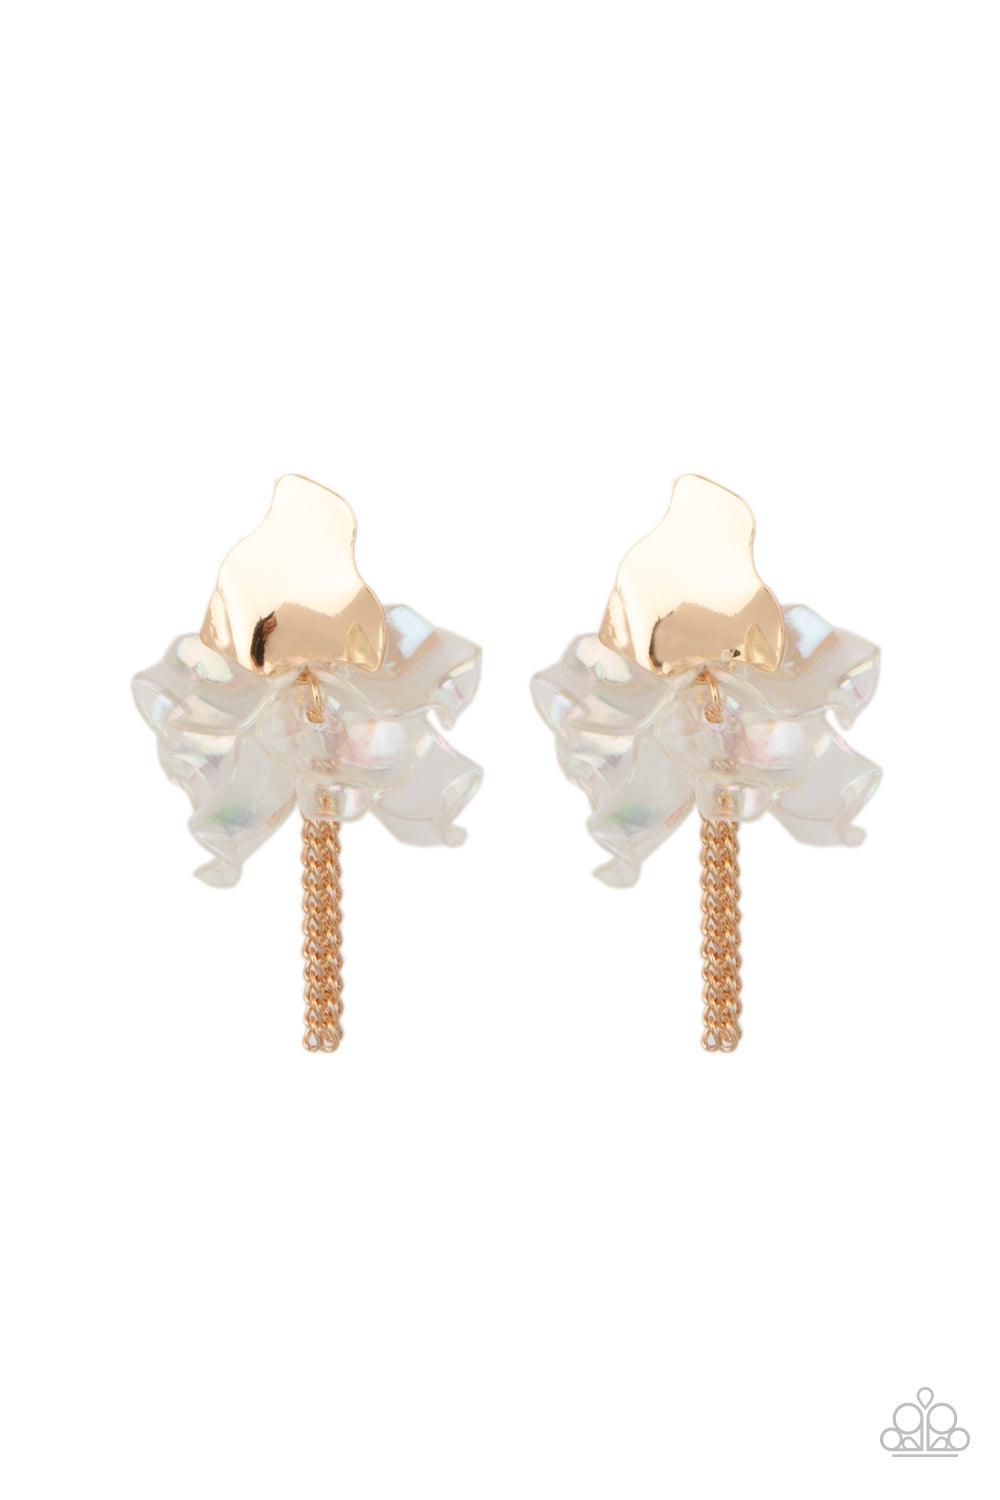 Paparazzi Accessories Harmonically Holographic - Gold Dainty gold chains stream out from the bottom of iridescent acrylic petal-like frames that attach to an asymmetrical gold frame, creating an enchanting cluster. Earring attaches to a standard post fitt